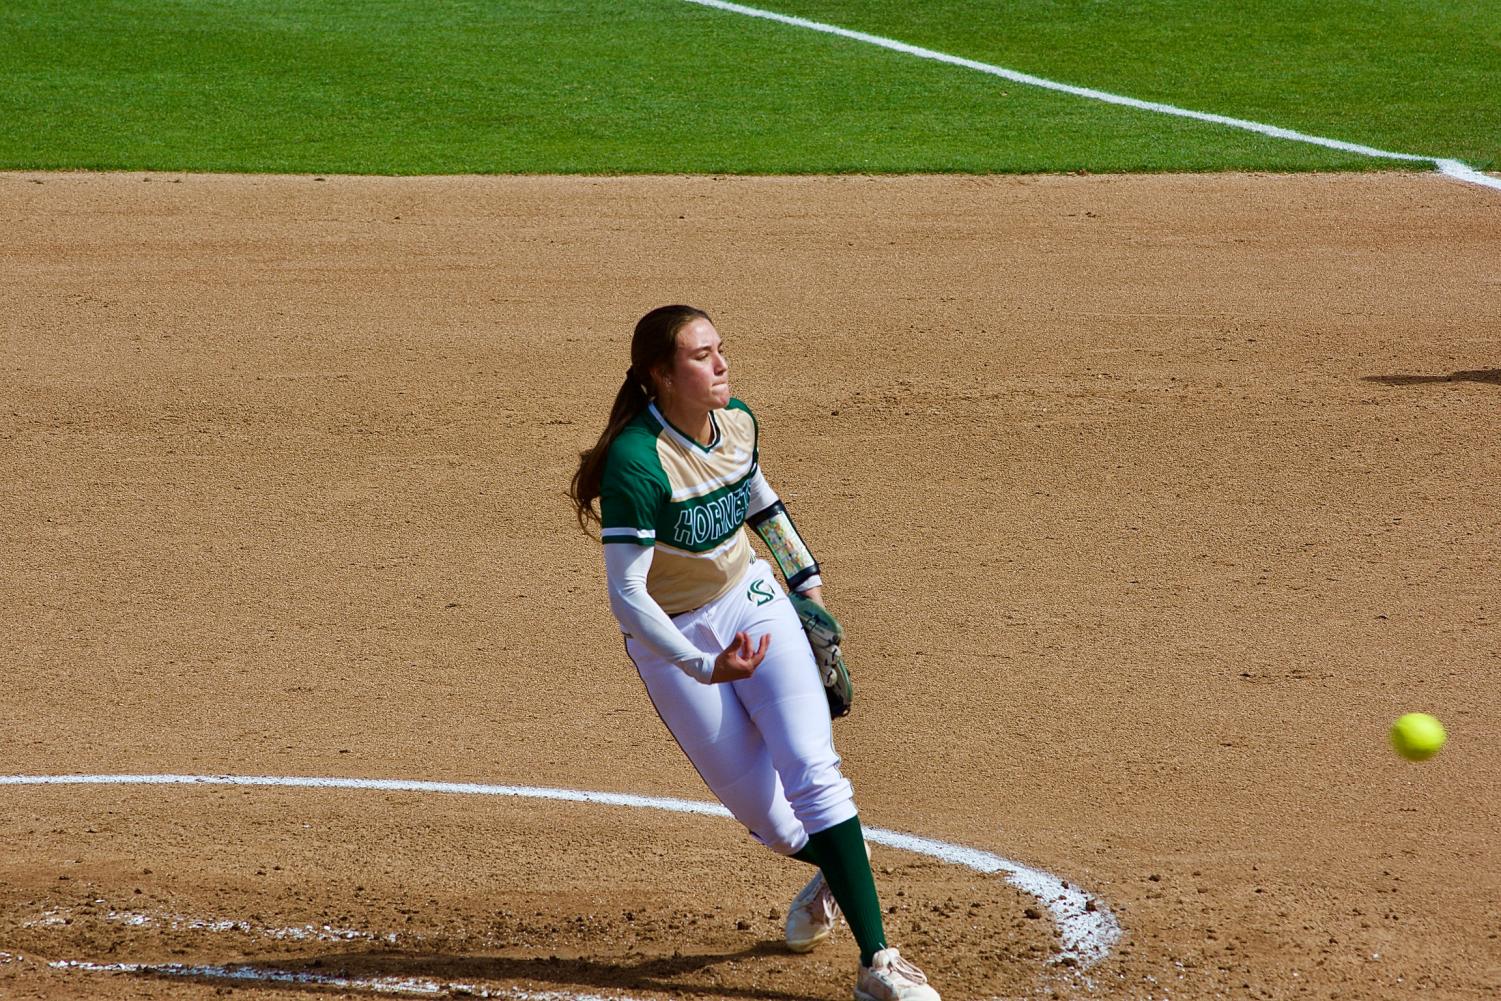 Marissa Bertuccio pitches against the University of North Dakota at Shea Stadium on Thursday. Bertuccio earned her tenth win of the season while striking out eight batters and allowing just two hits in the Mizuno Classic this past weekend. 